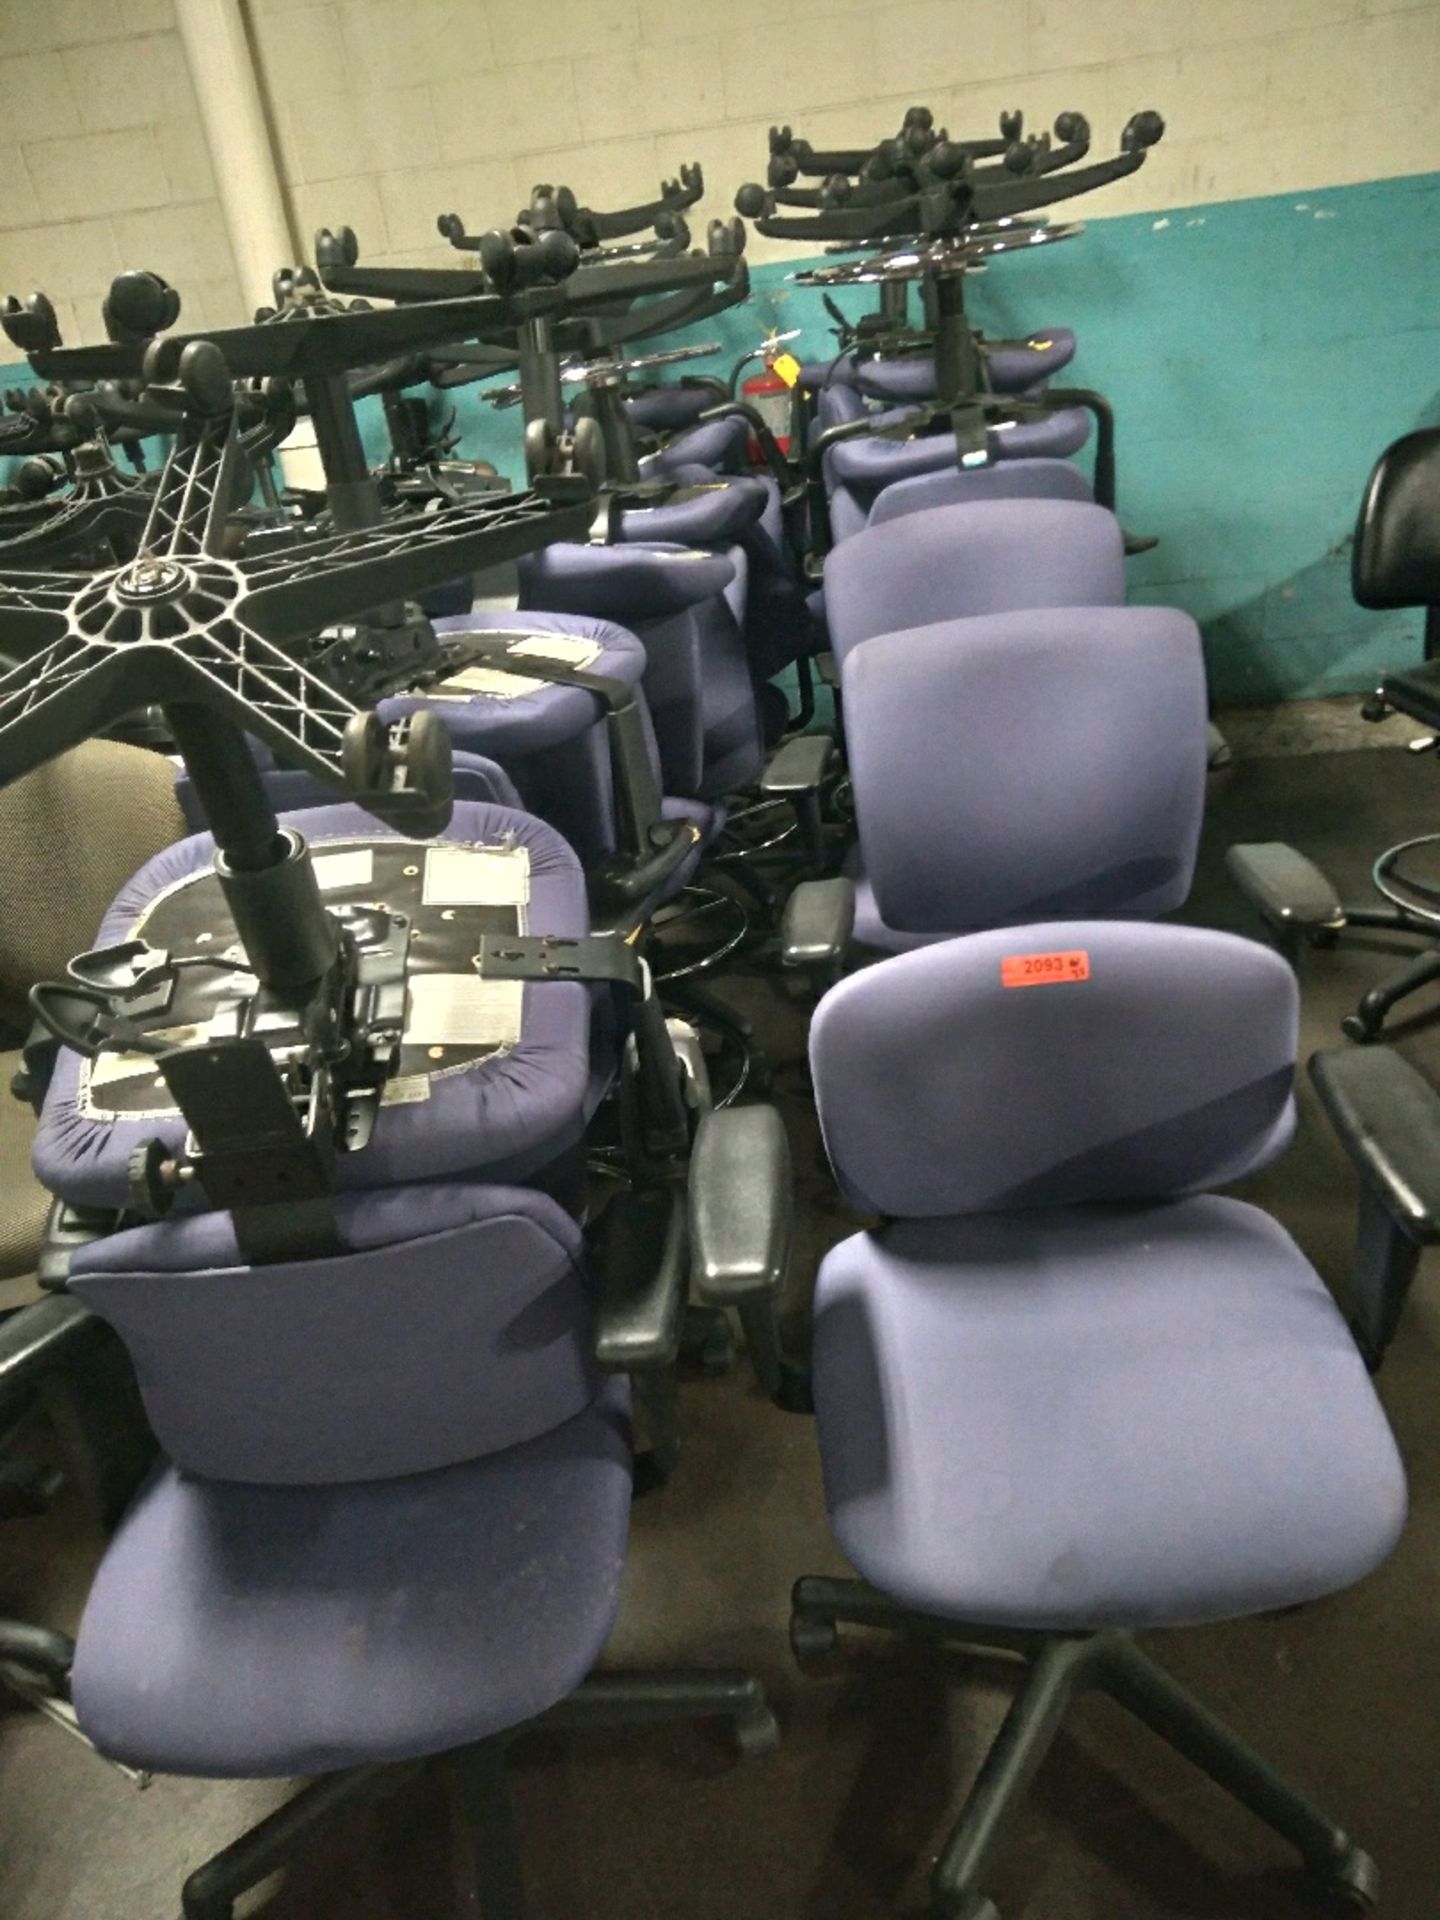 VARIOUS TASK OFFICE ARM-CHAIRS ON WHEELS QTY: 21, LOCATED: 3821 N. FRATNEY STREET MILWAUKEE, WI 5321